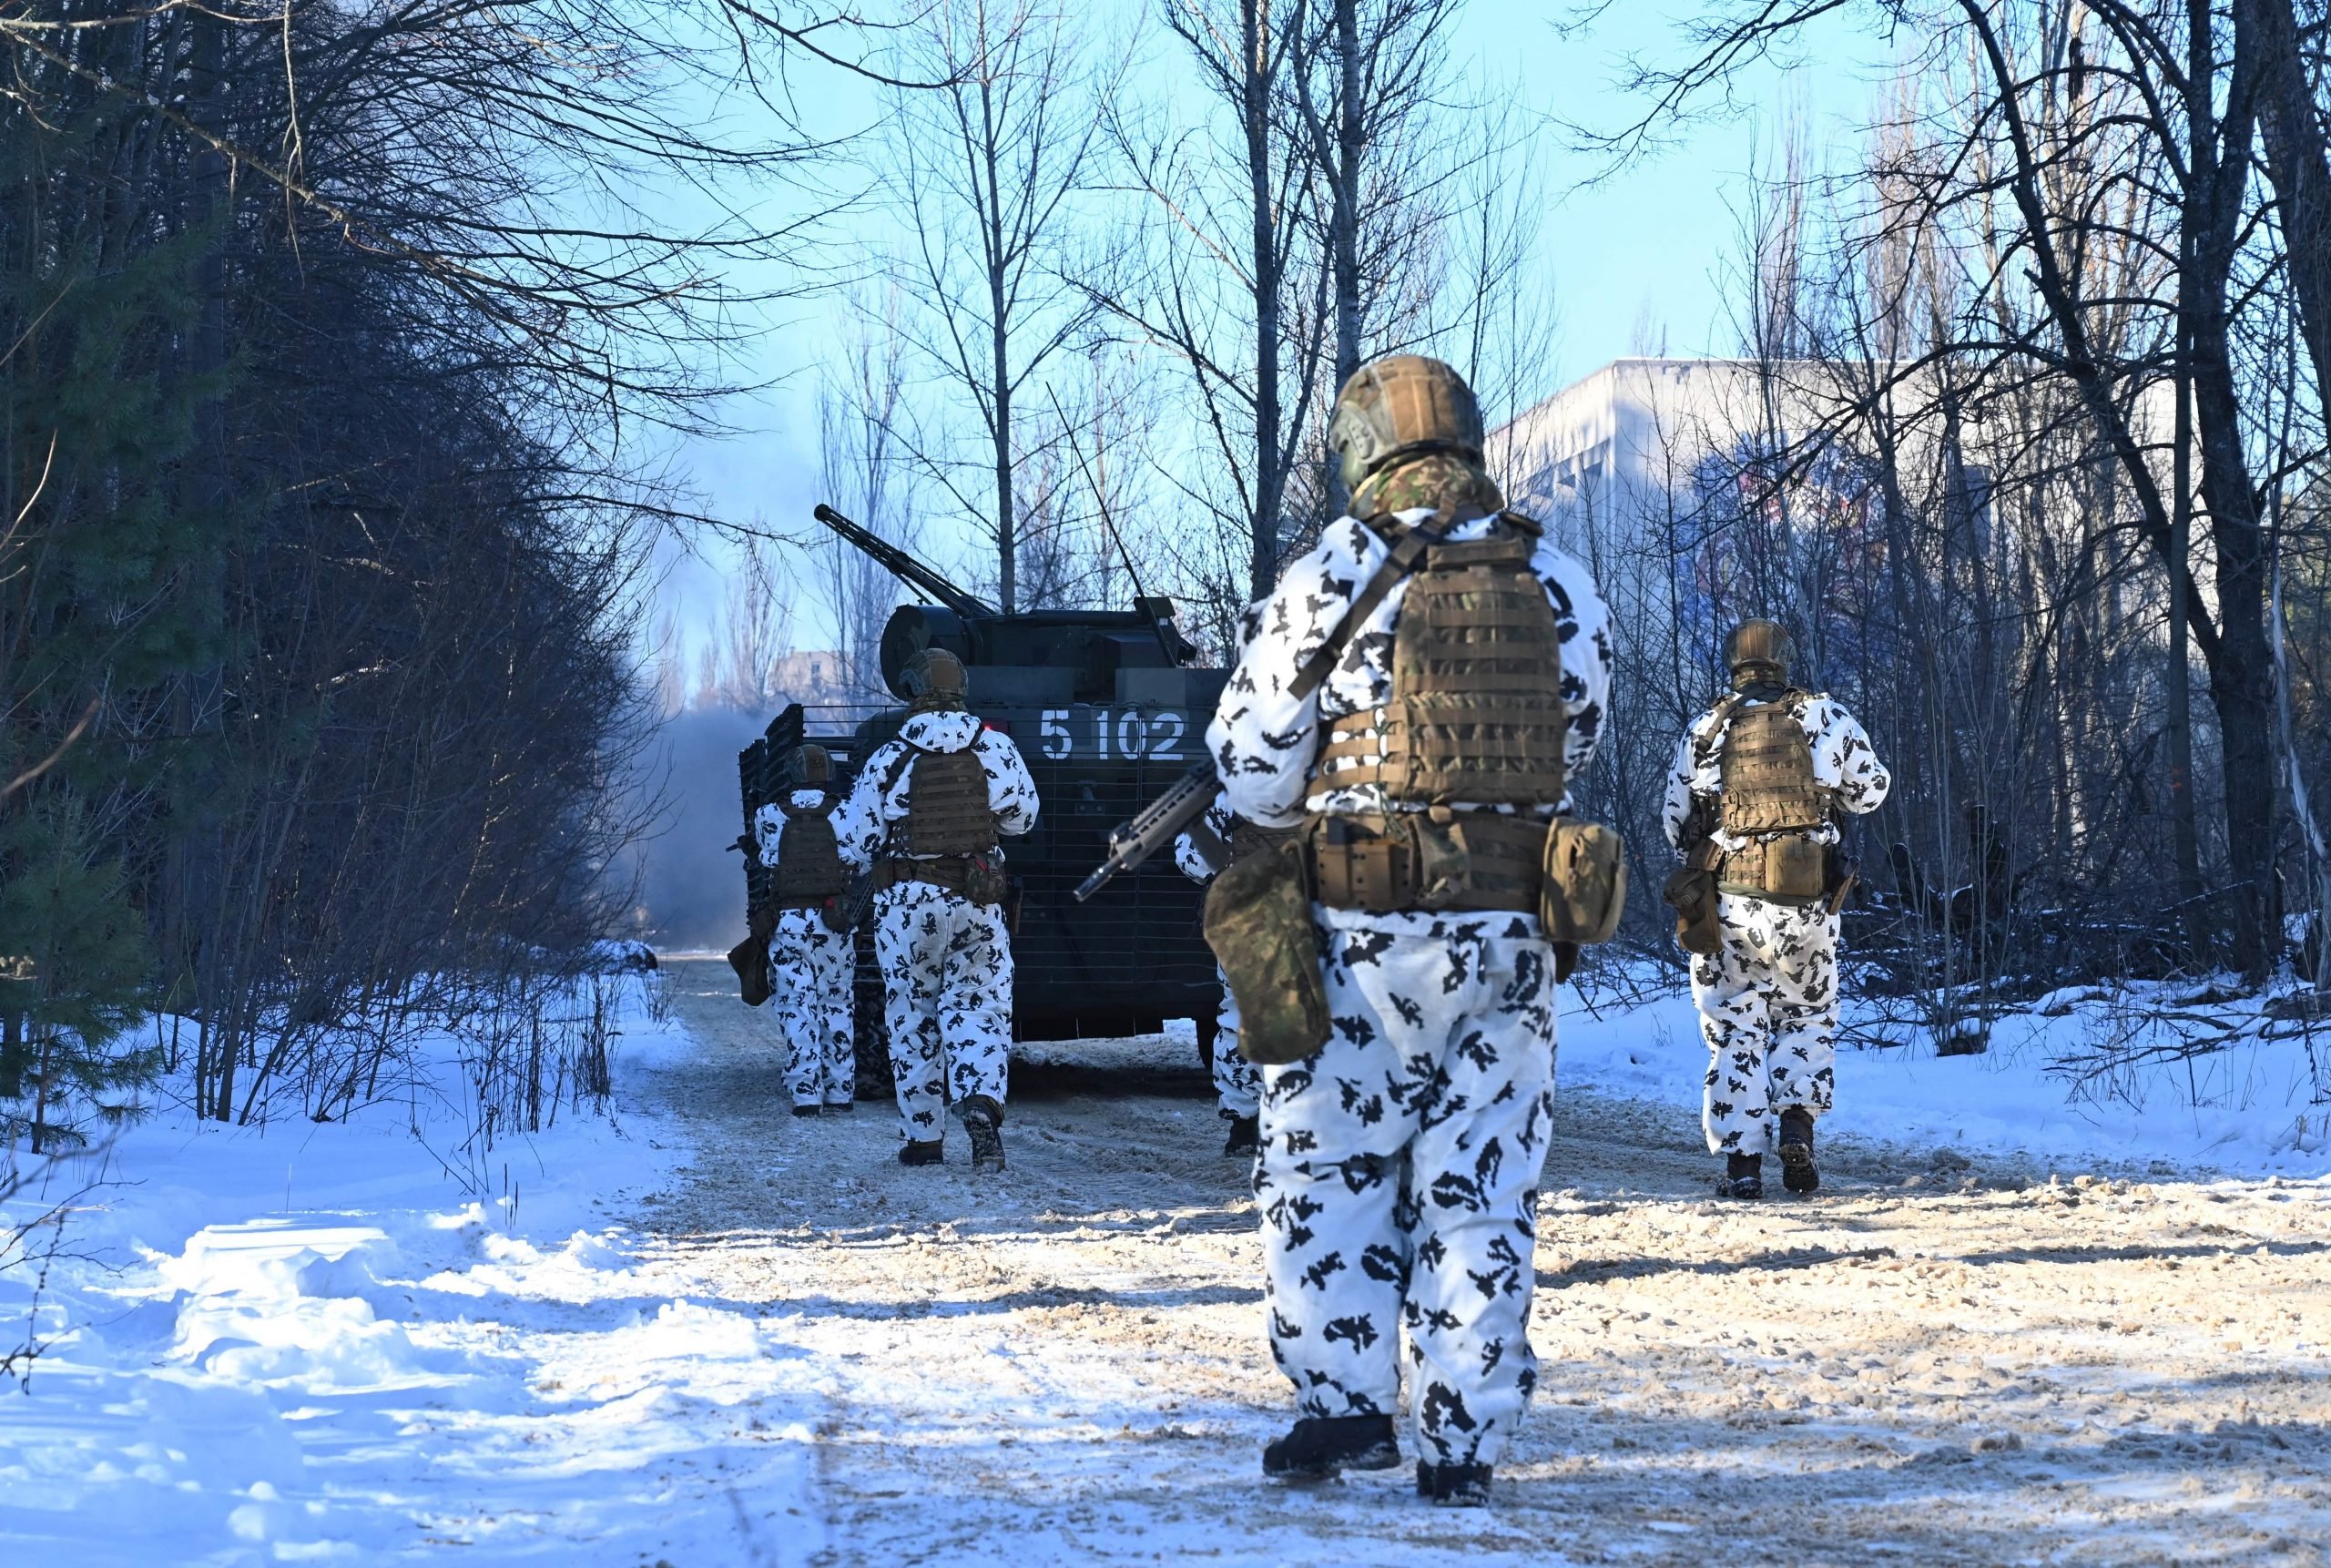 Servicemen take part in a joint tactical and special exercises of the Ukrainian Ministry of Internal Affairs, the Ukrainian National Guard and Ministry Emergency in a ghost city of Pripyat, near Chernobyl Nuclear Power Plant on February 4, 2022.